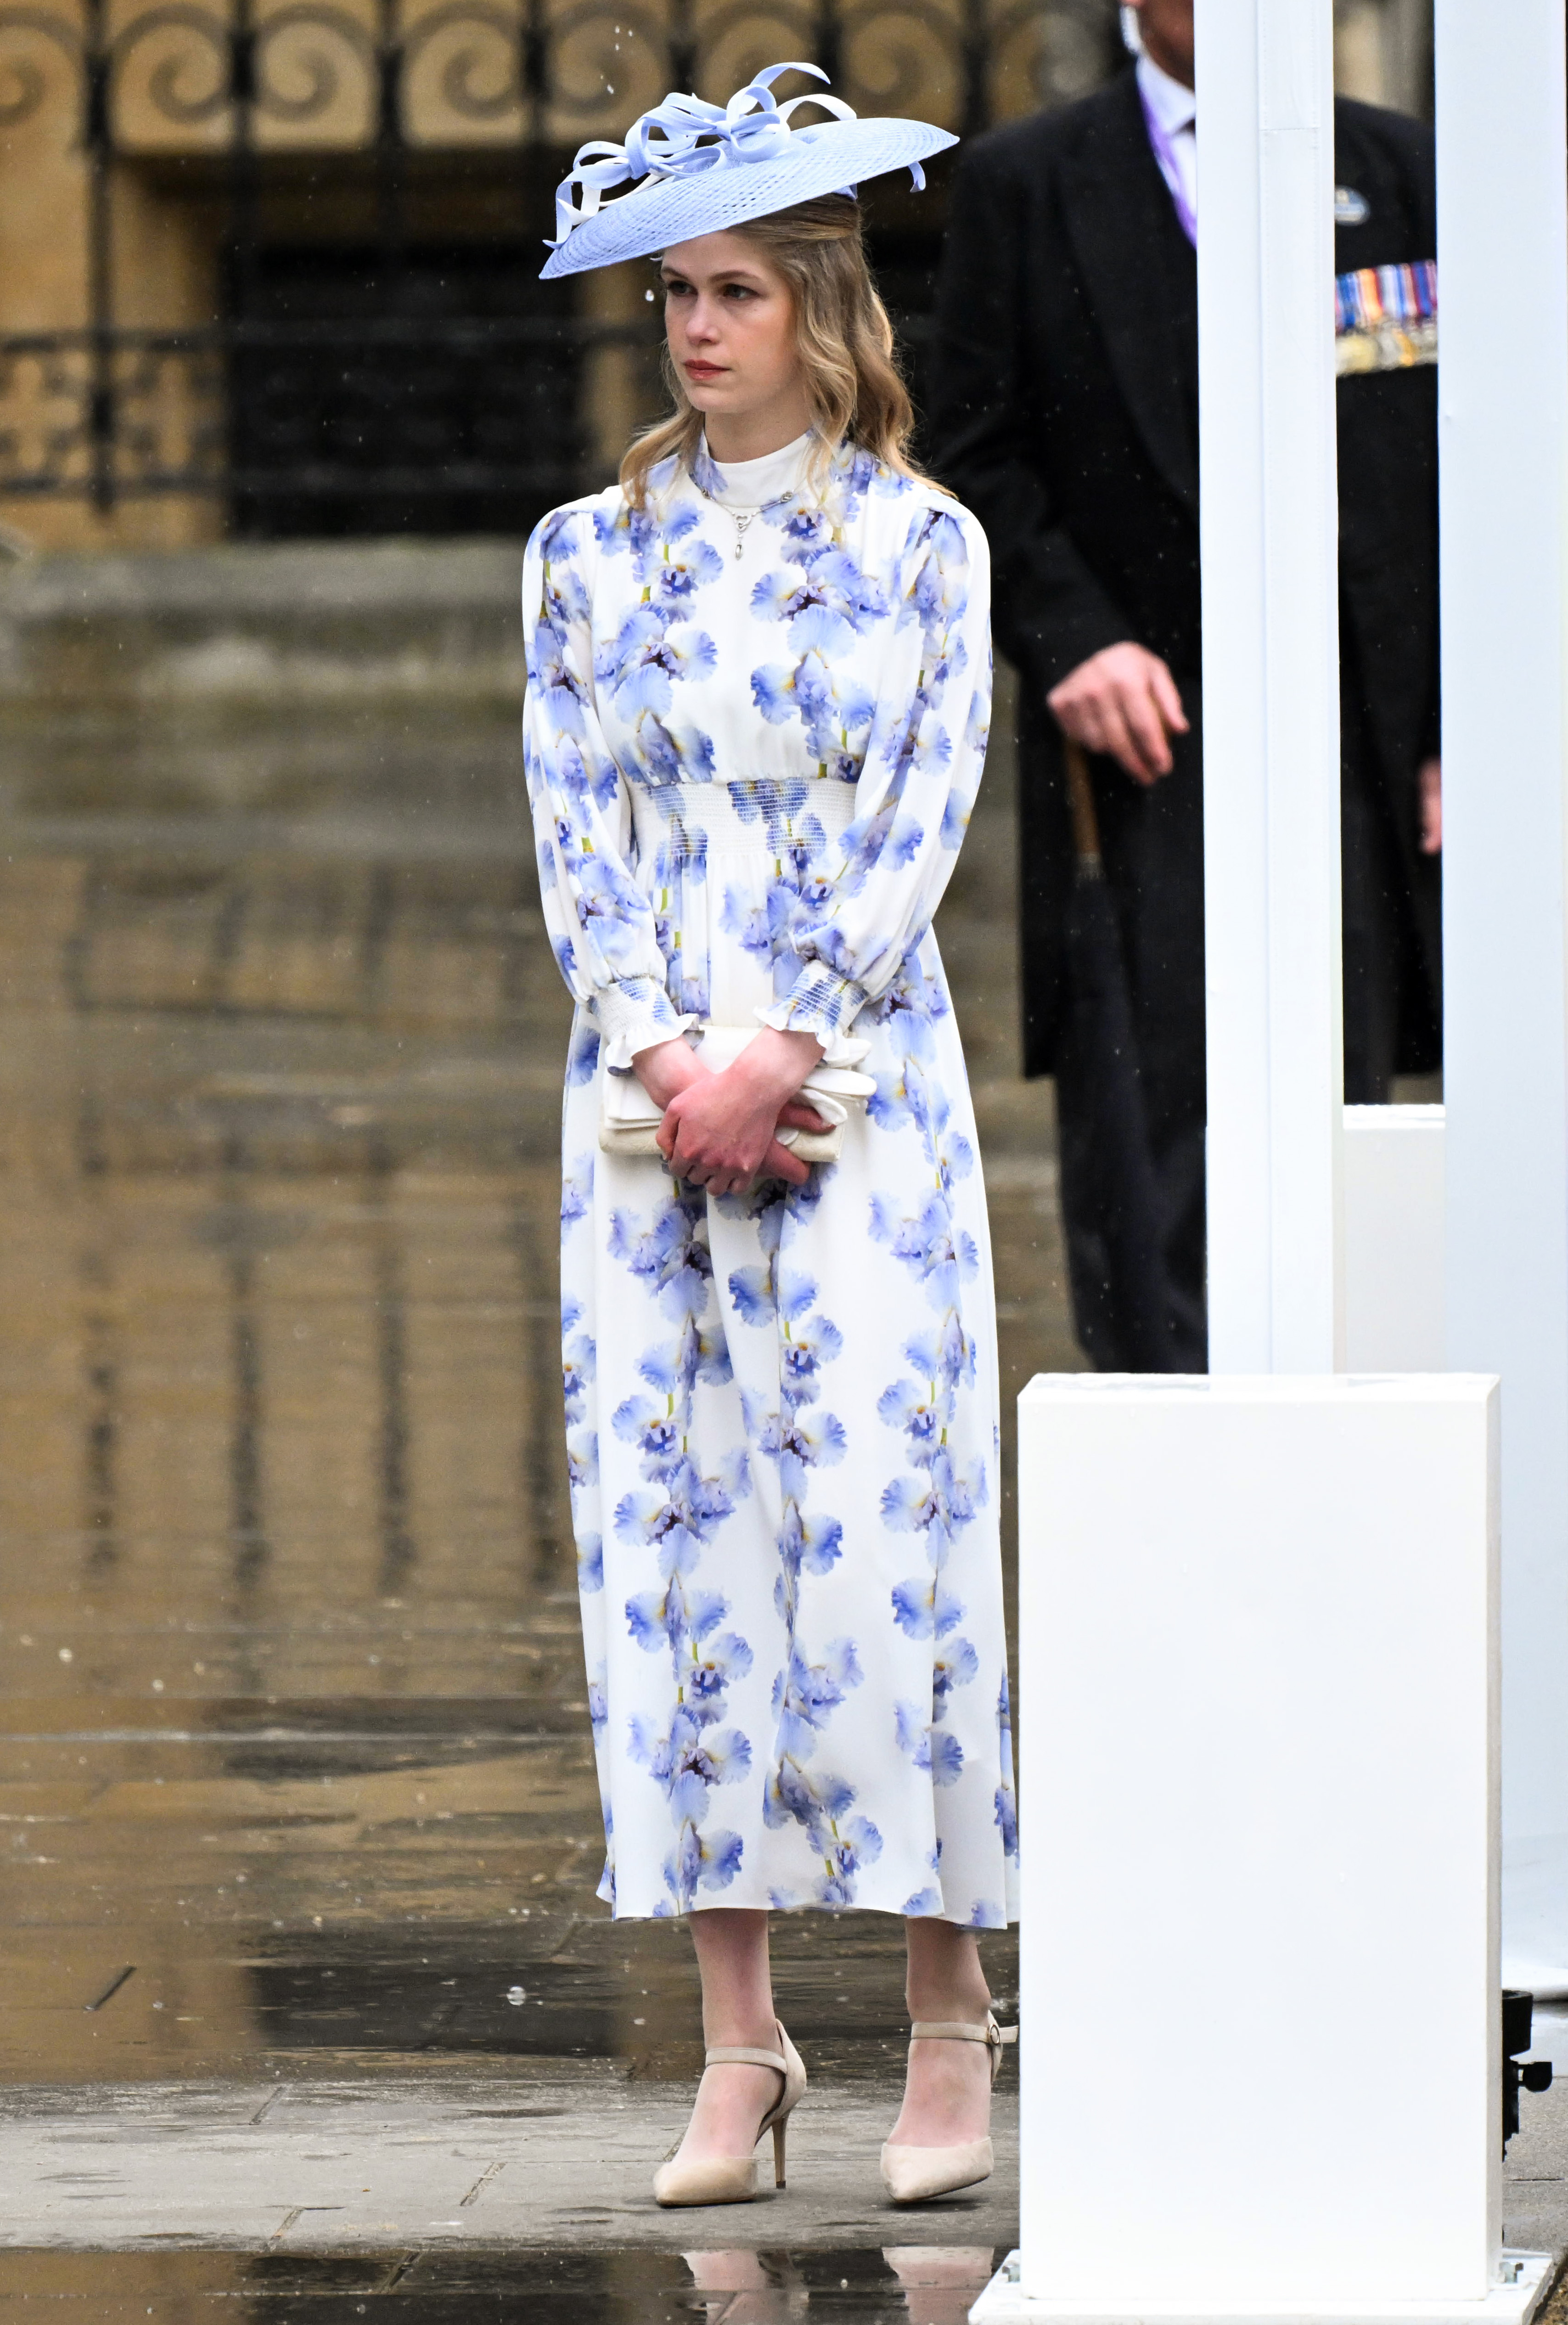 Lady Louise Windsor at the Coronation of King Charles III and Queen Camilla at Westminster Abbey on May 6, 2023. | Source: Getty Images